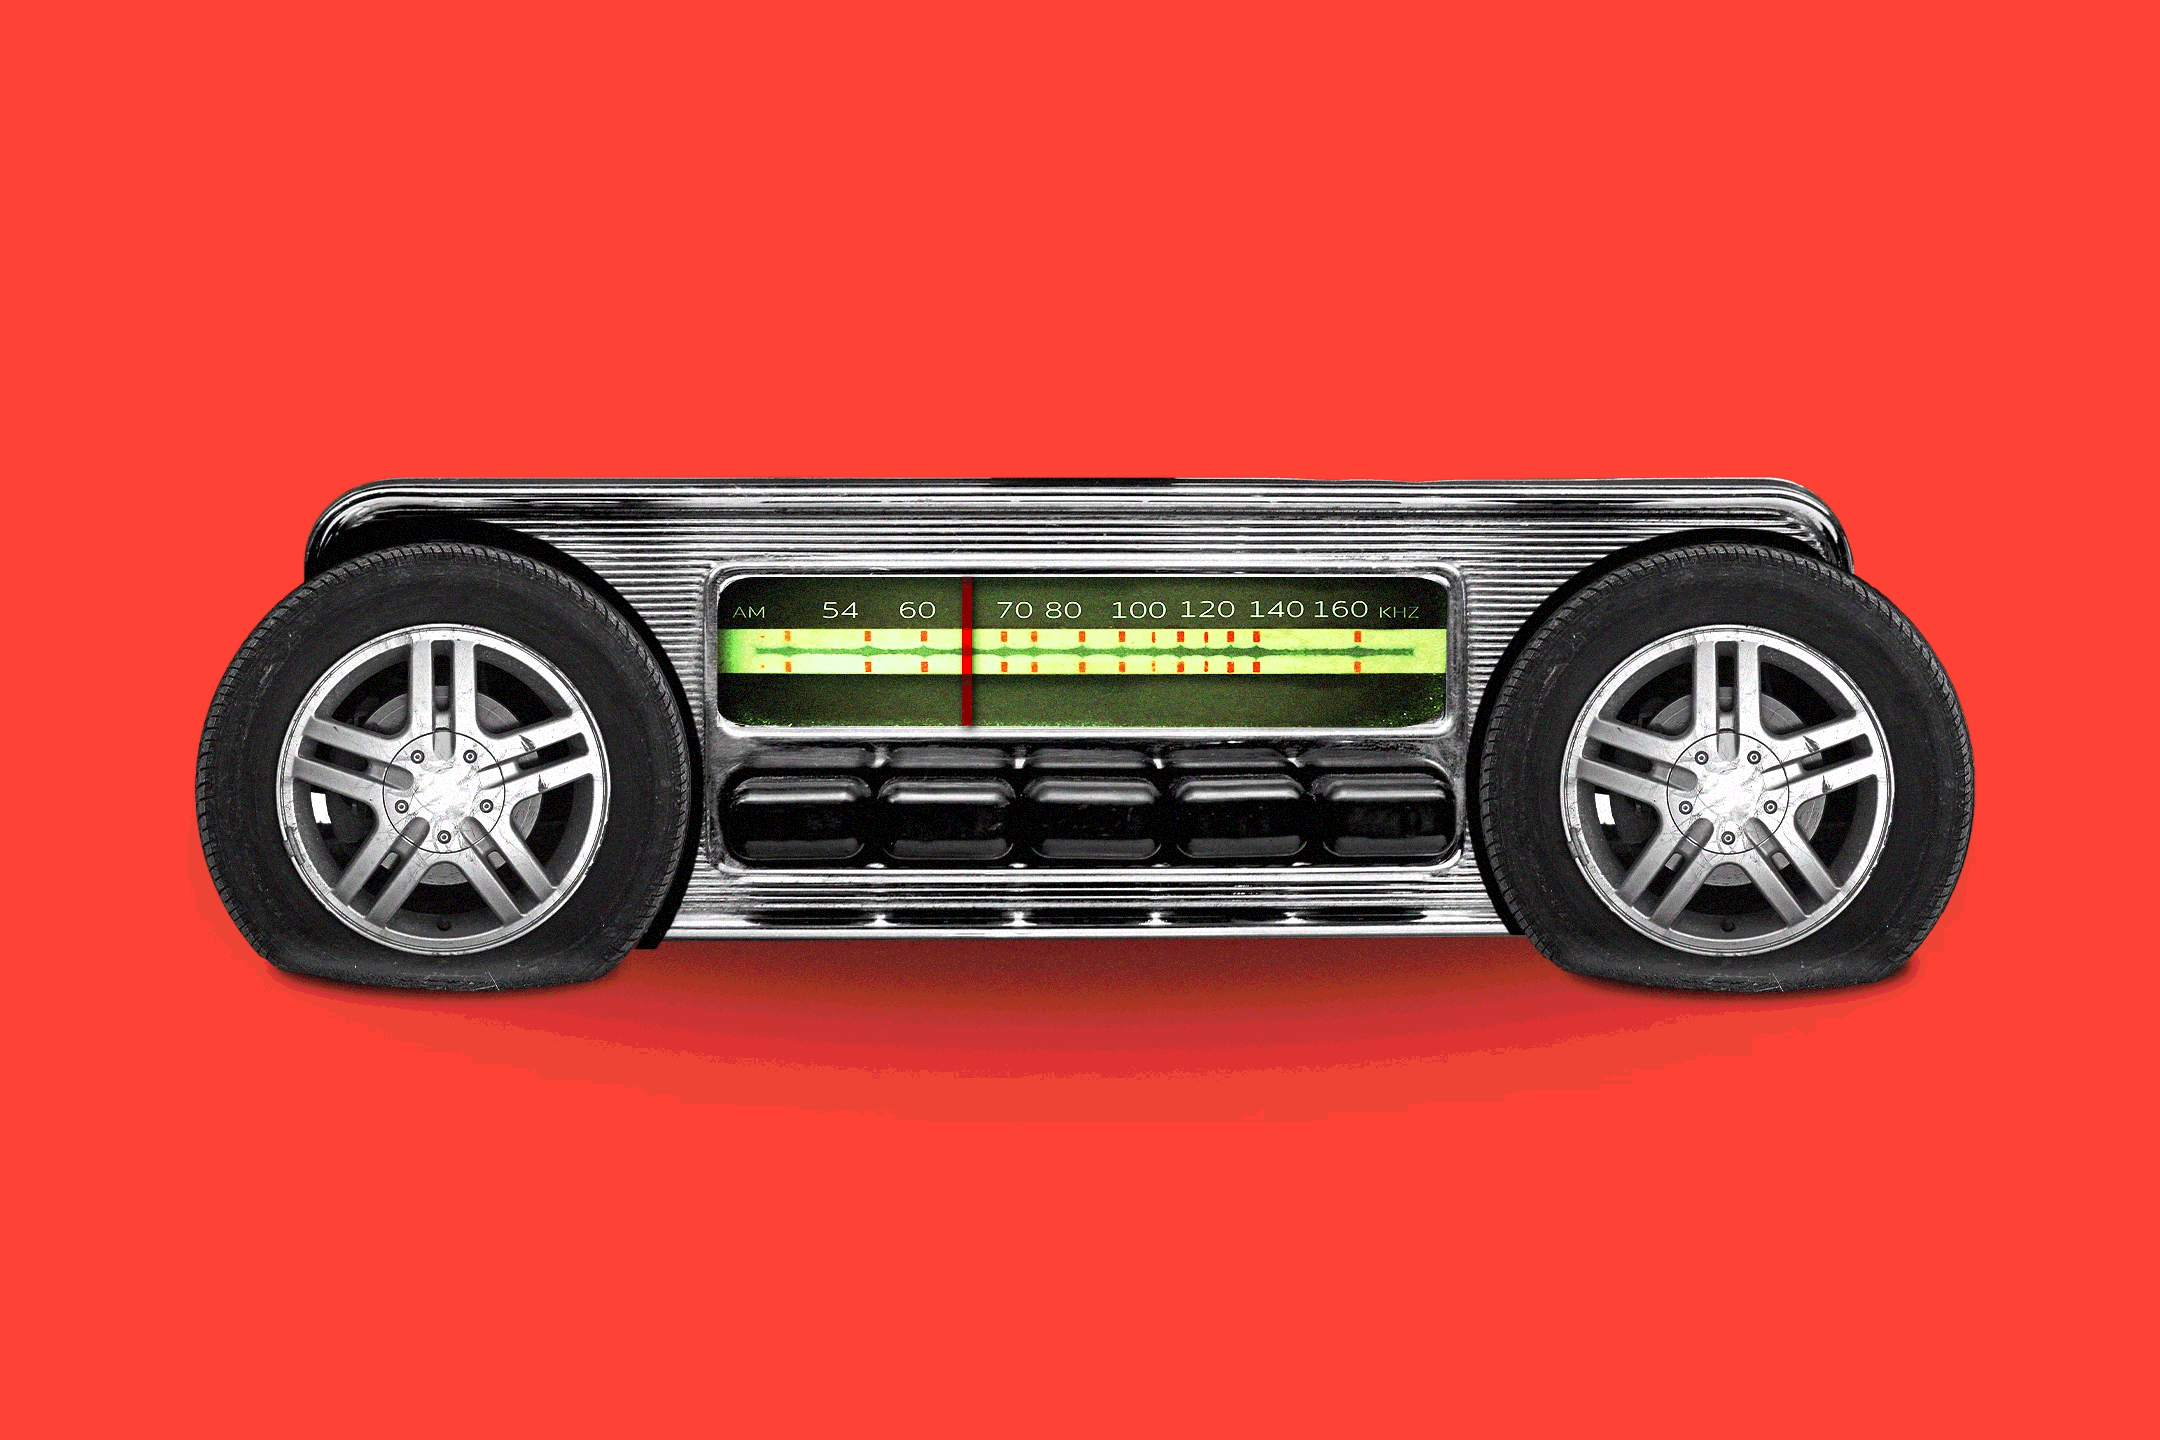 An illustration of an old AM radio merged with a car that has flat tires